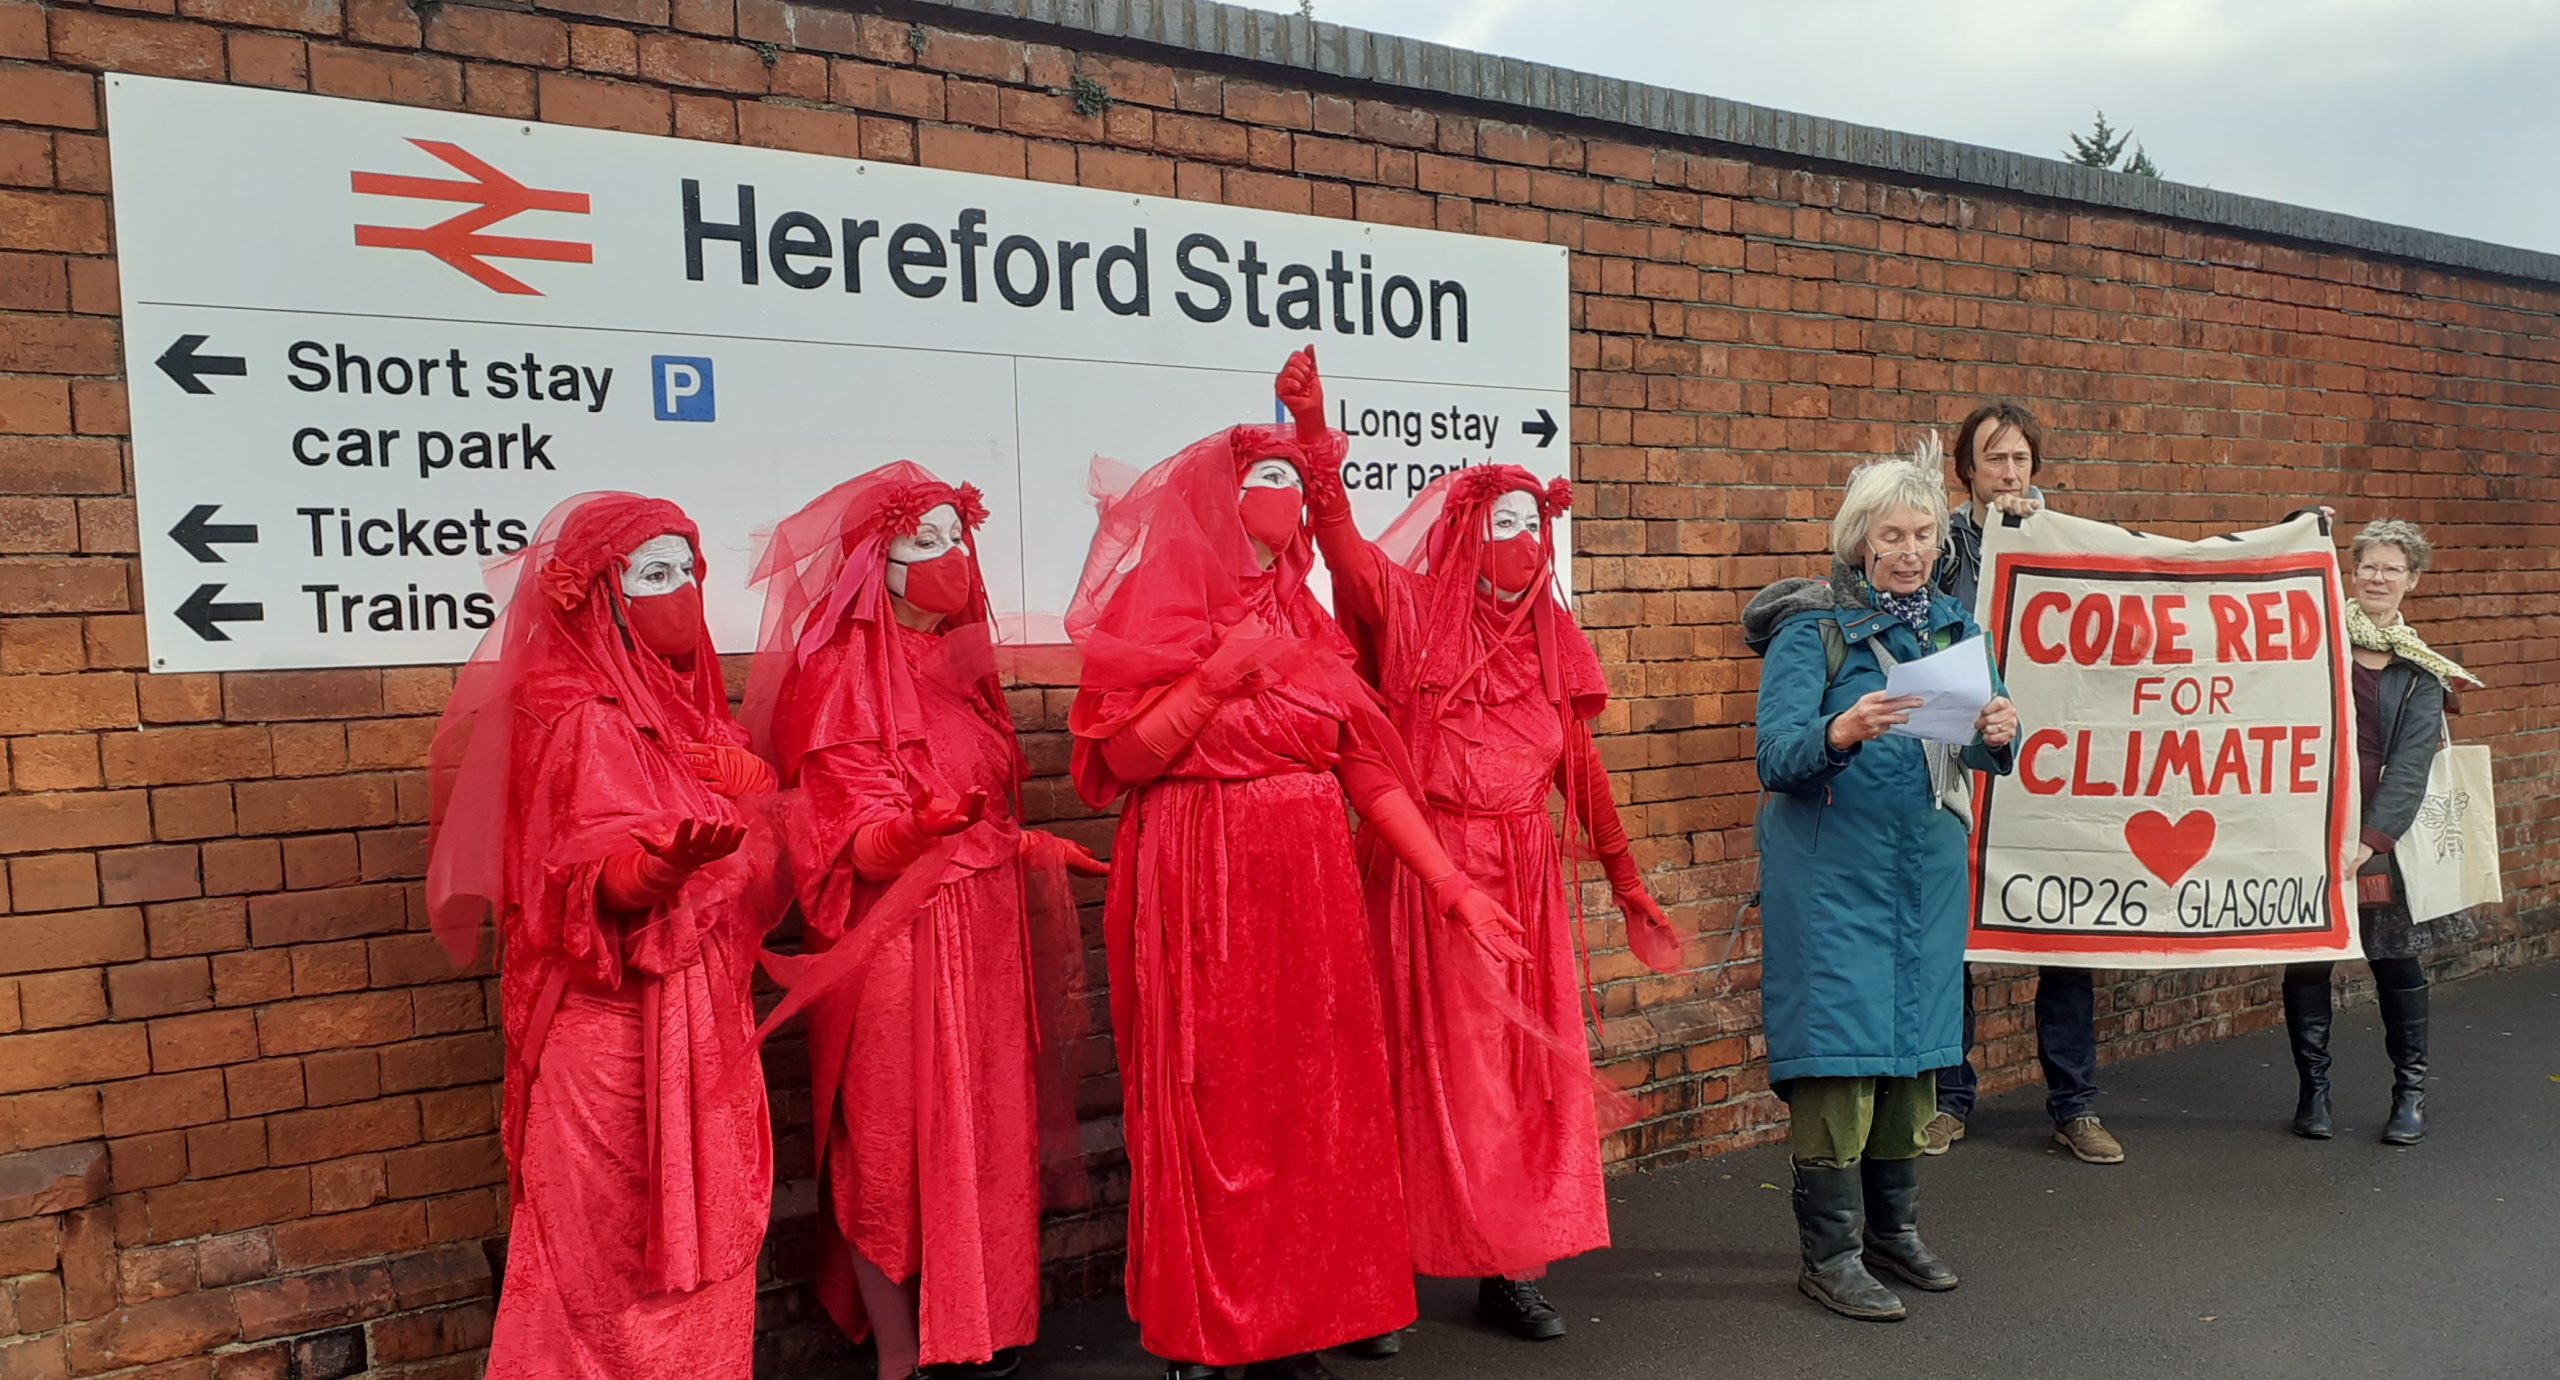 NEWS | From the declaration of a climate emergency in Herefordshire to actual action